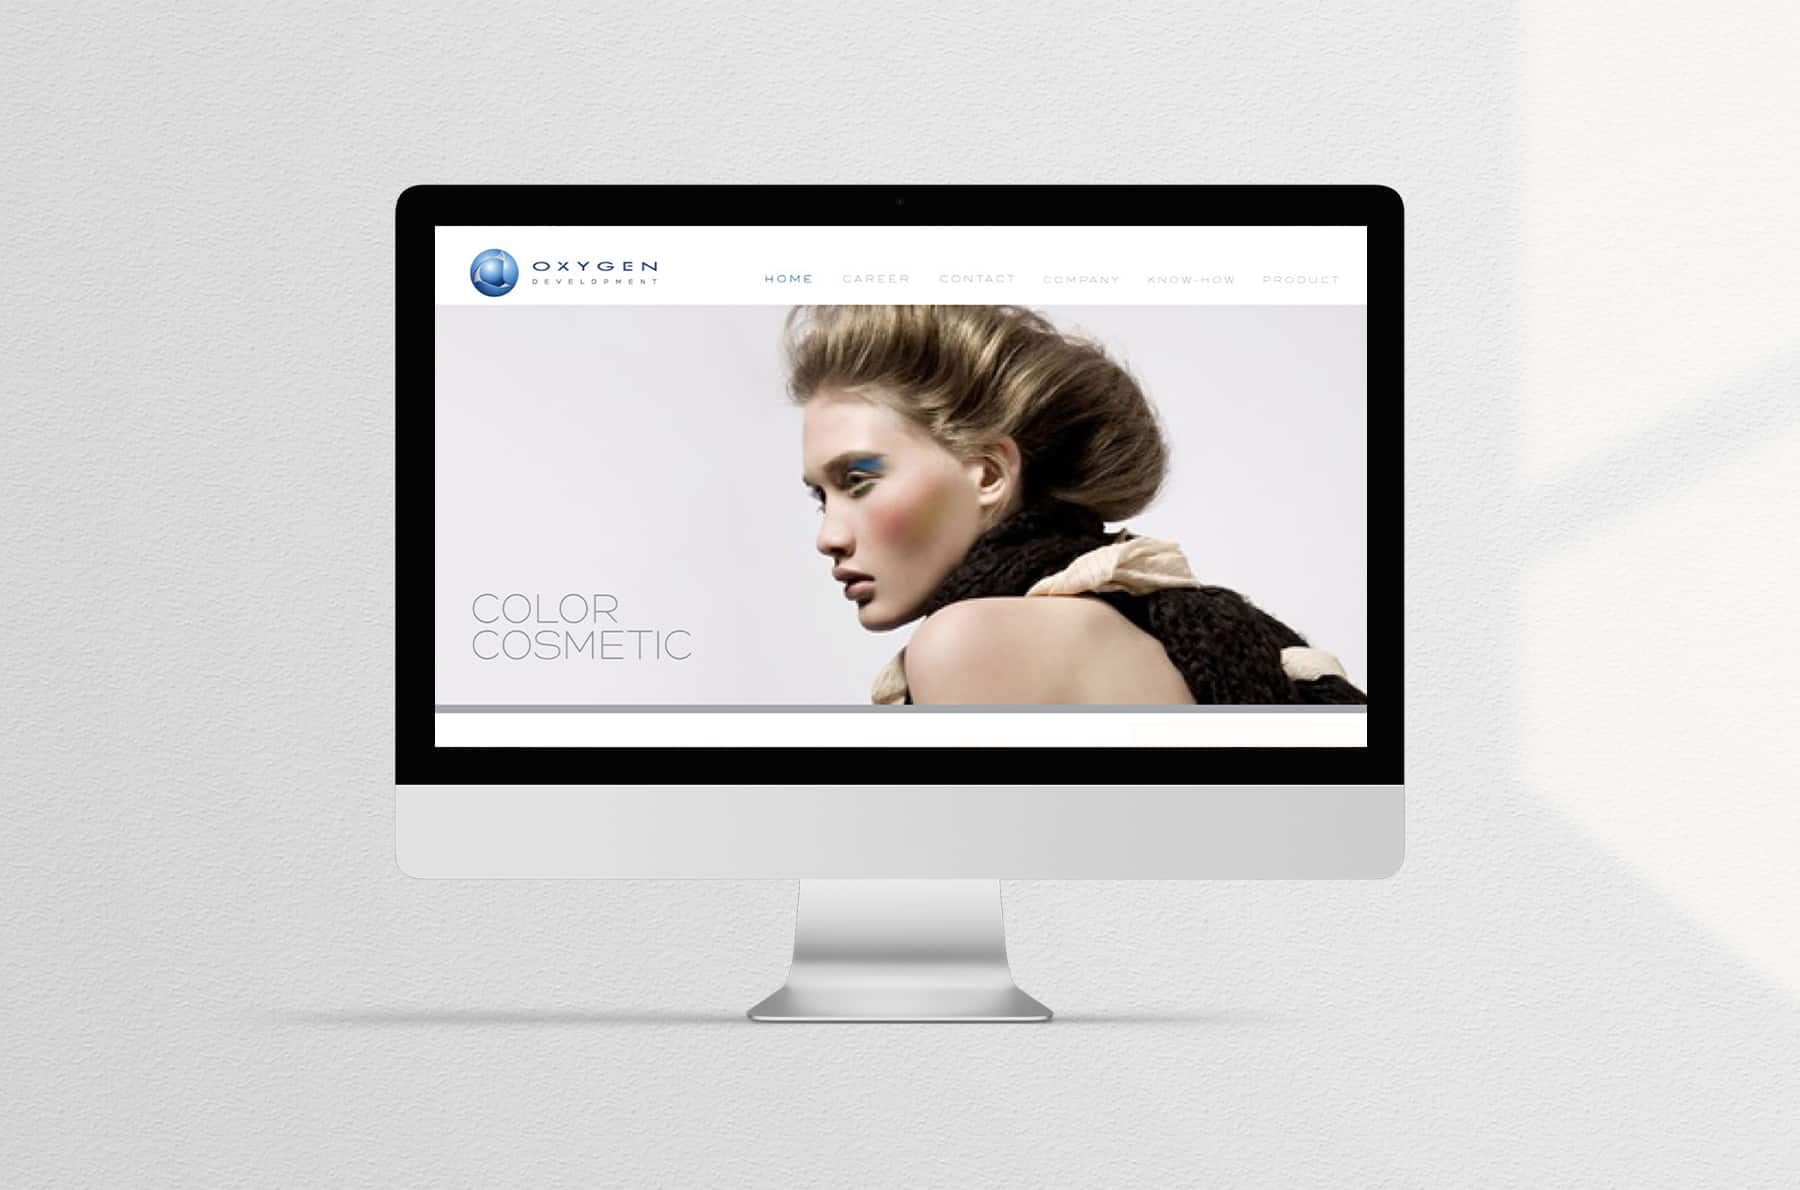 Oxygen premium website in clean white and neutral tones showing couture makeup products and flawless skincare models.